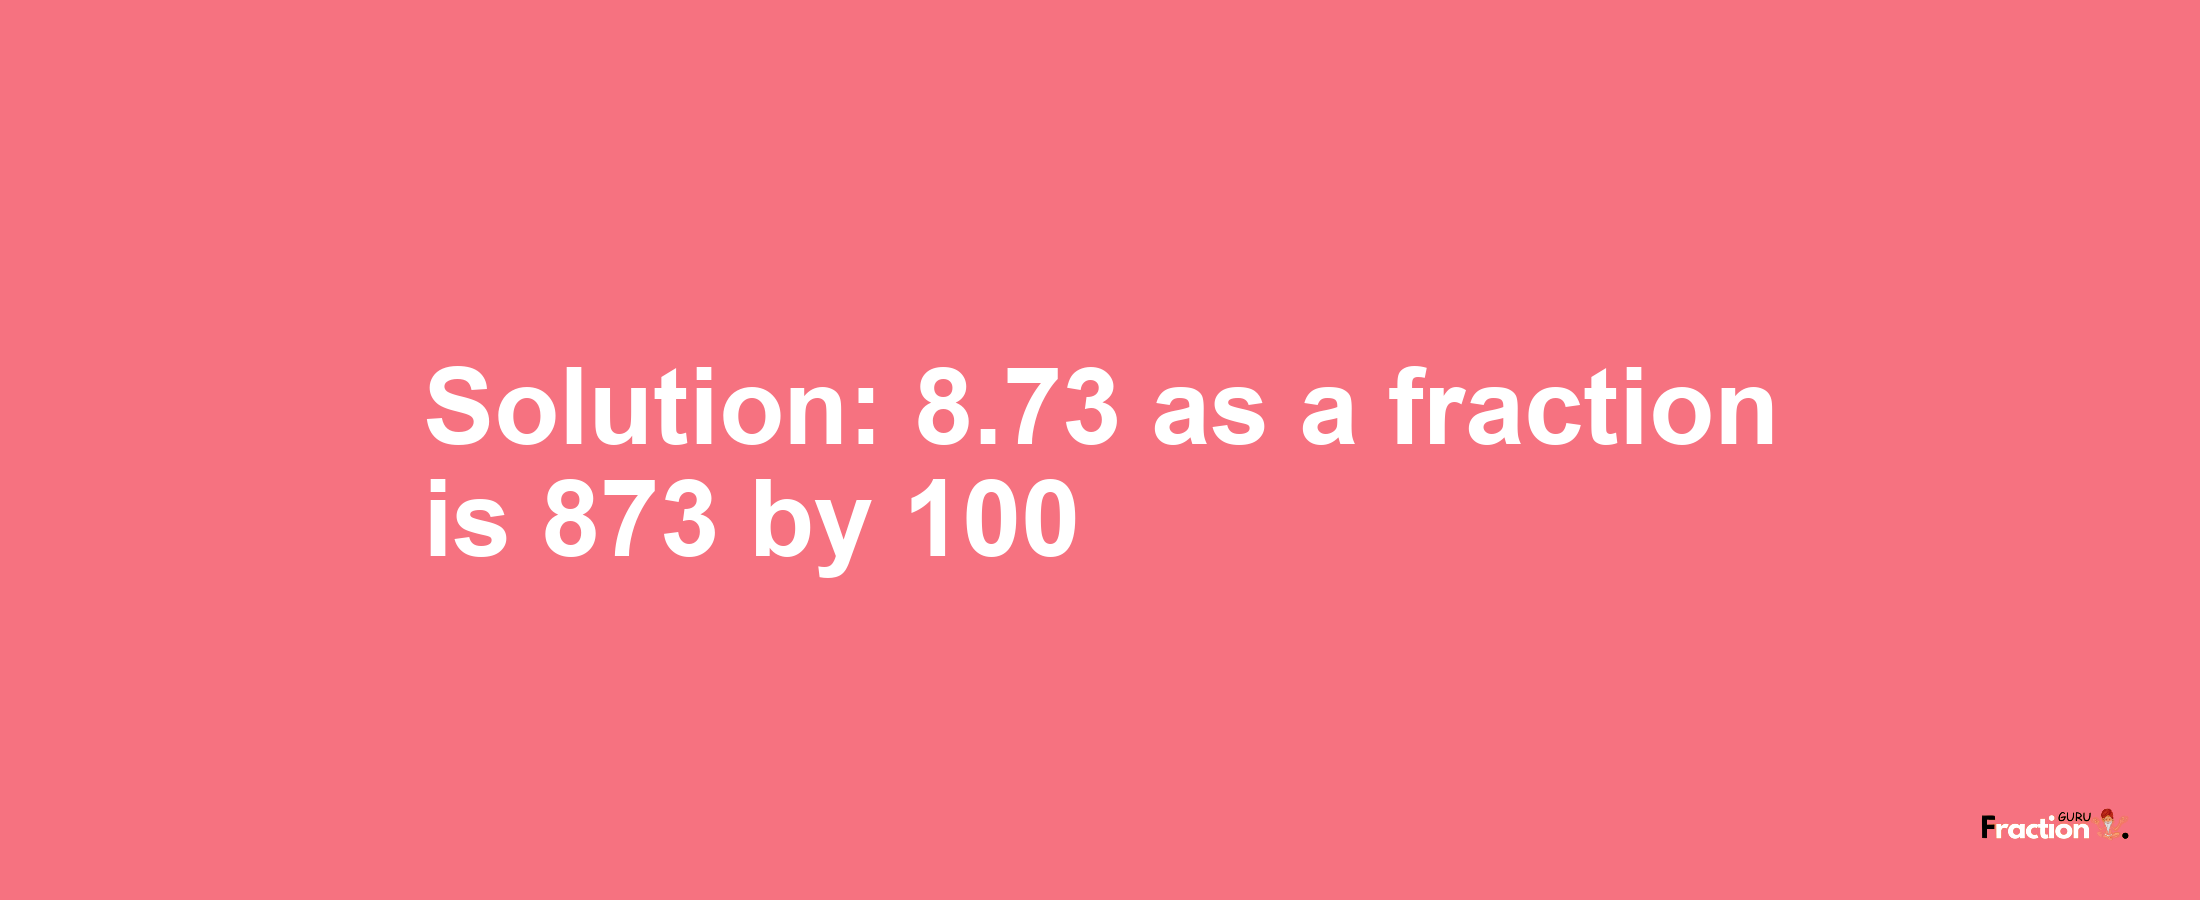 Solution:8.73 as a fraction is 873/100